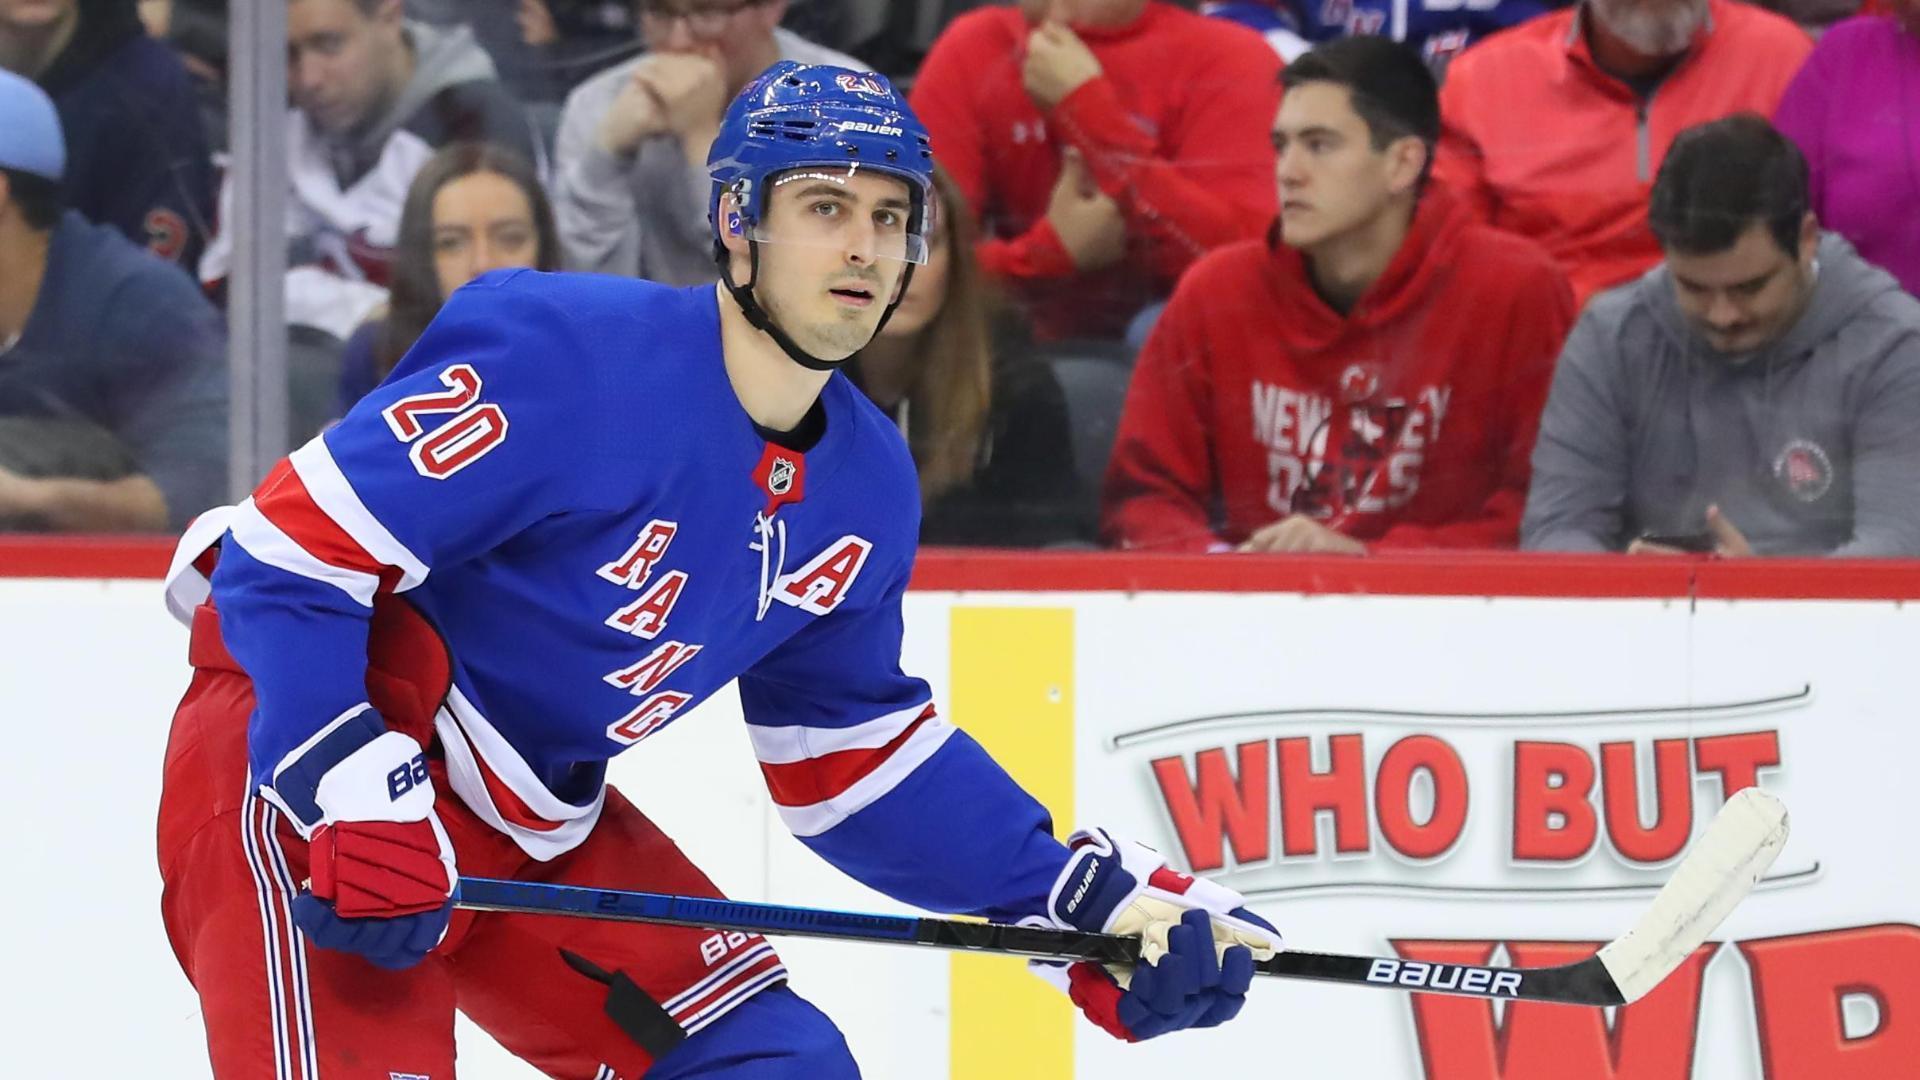 The New York Rangers have to lock-up Chris Kreider for the long haul